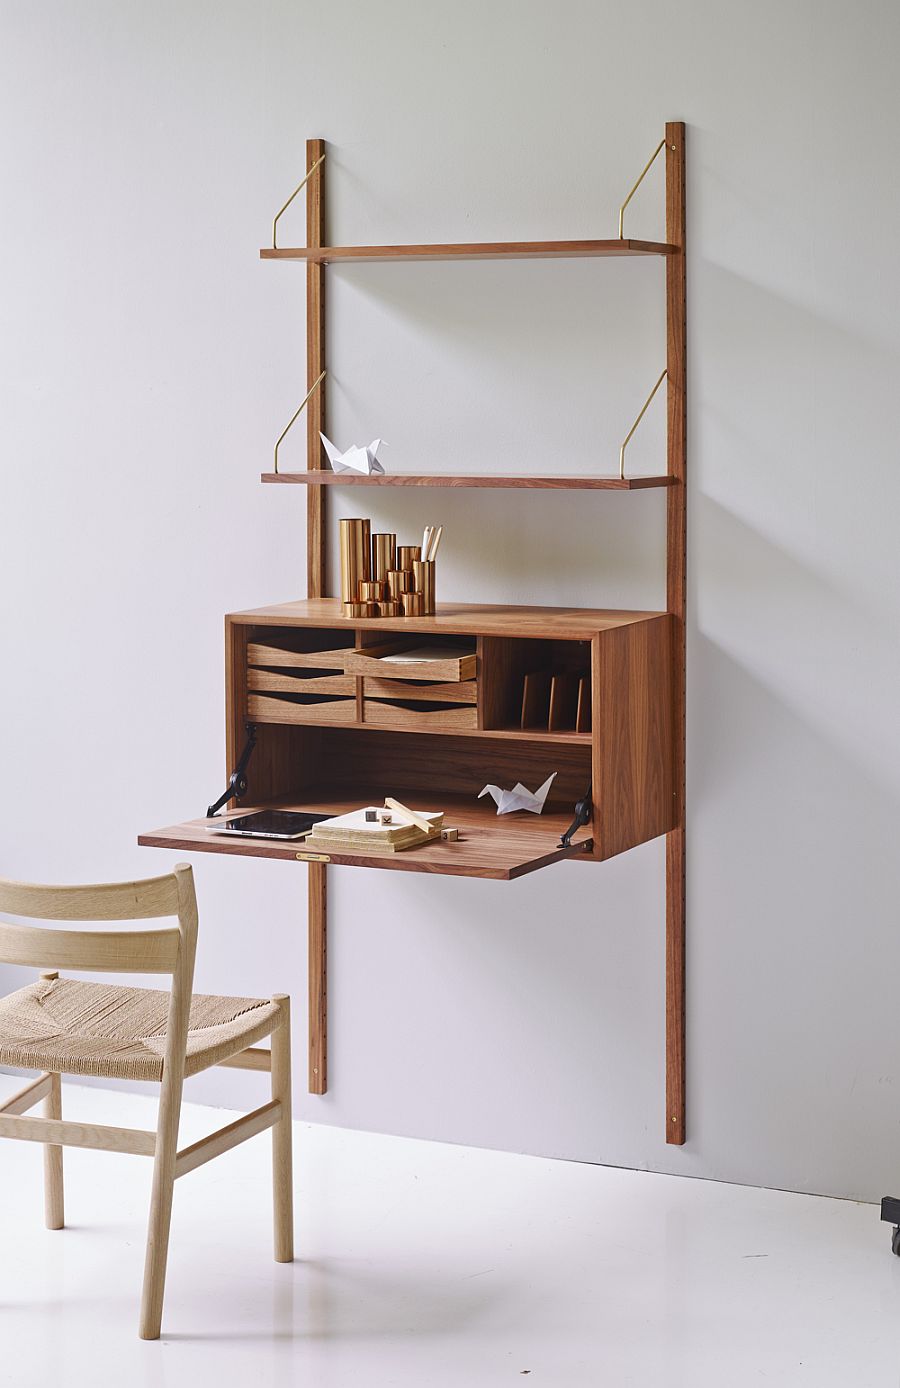 Modular Shelving Systems That Are Chic, Wall Mounted Modular Shelving System